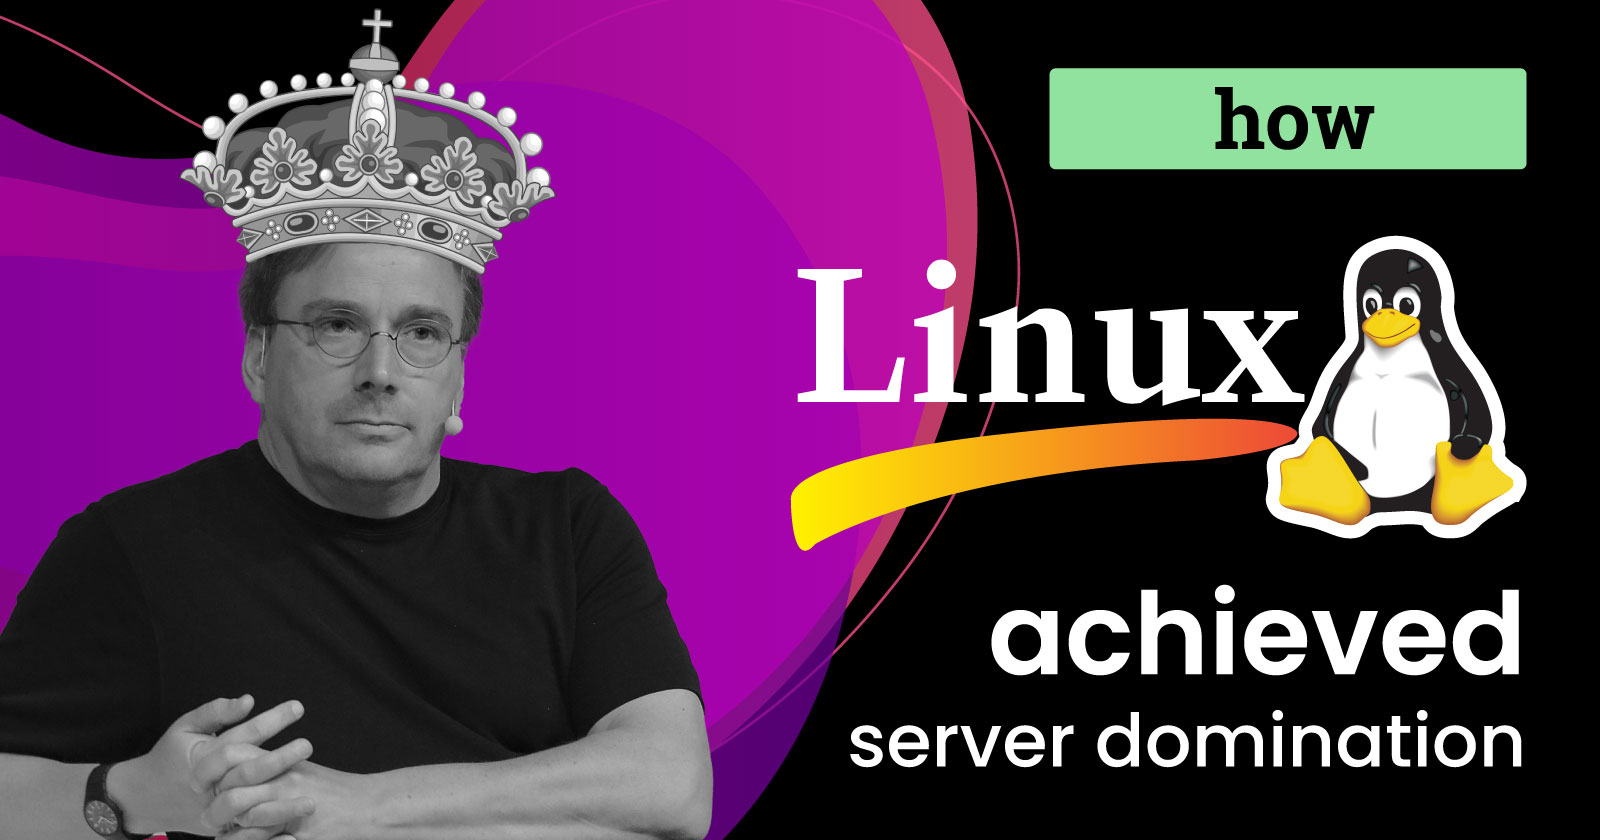 Image Showing Linus Torvalds and Linux Logo